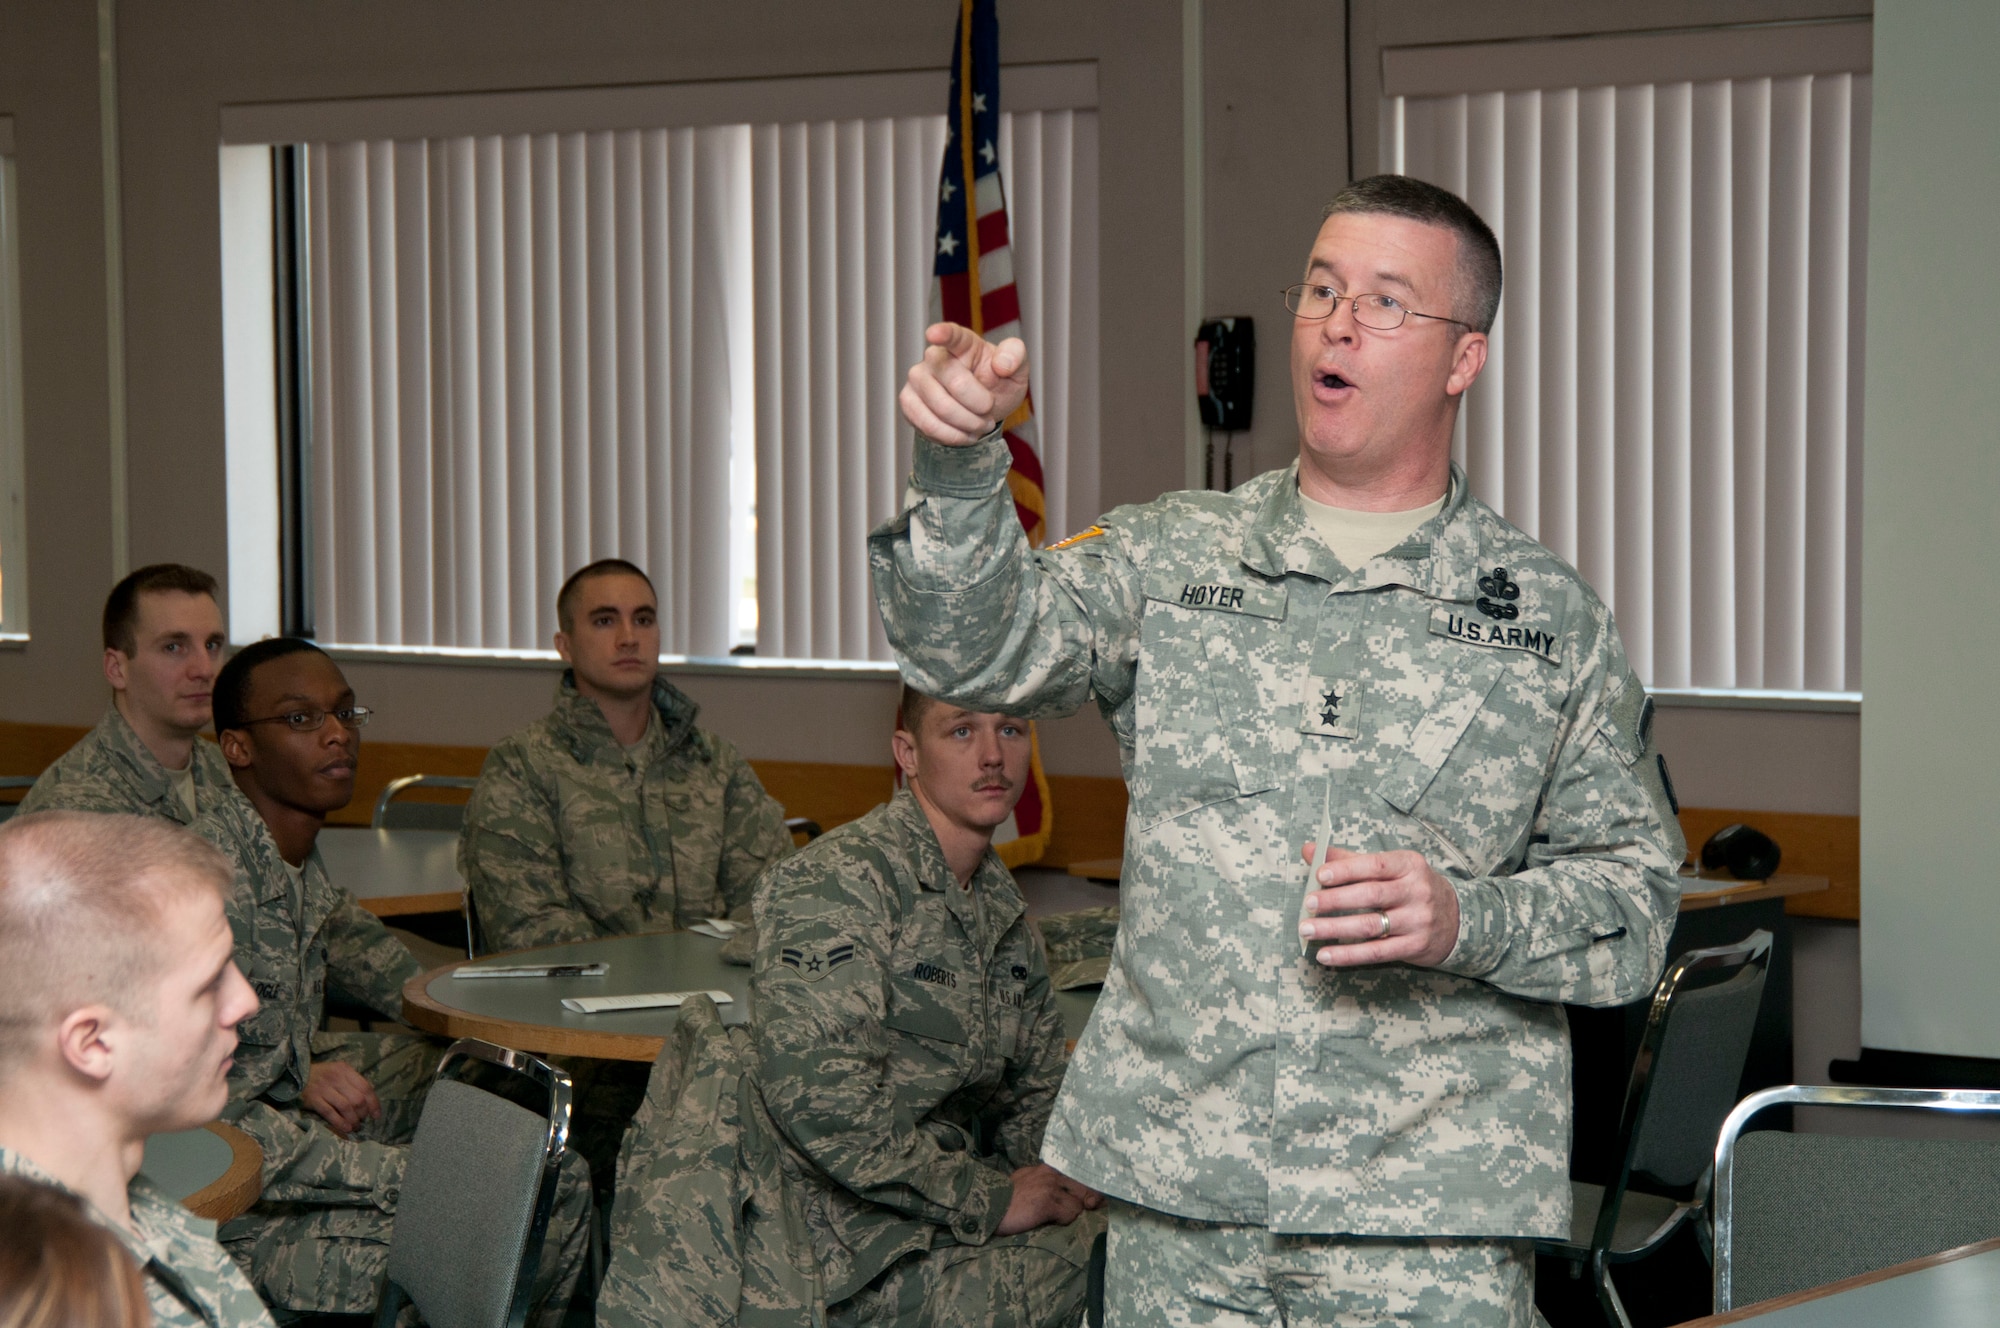 Major General James A. Hoyer, the new Adjutant General of the West Virginia Air National Guard, visited the men and women of the 167th Airlift Wing to share his vision and exchange ideas for the future. (U.S. Air Force photo by SSGT Mike Dickson)